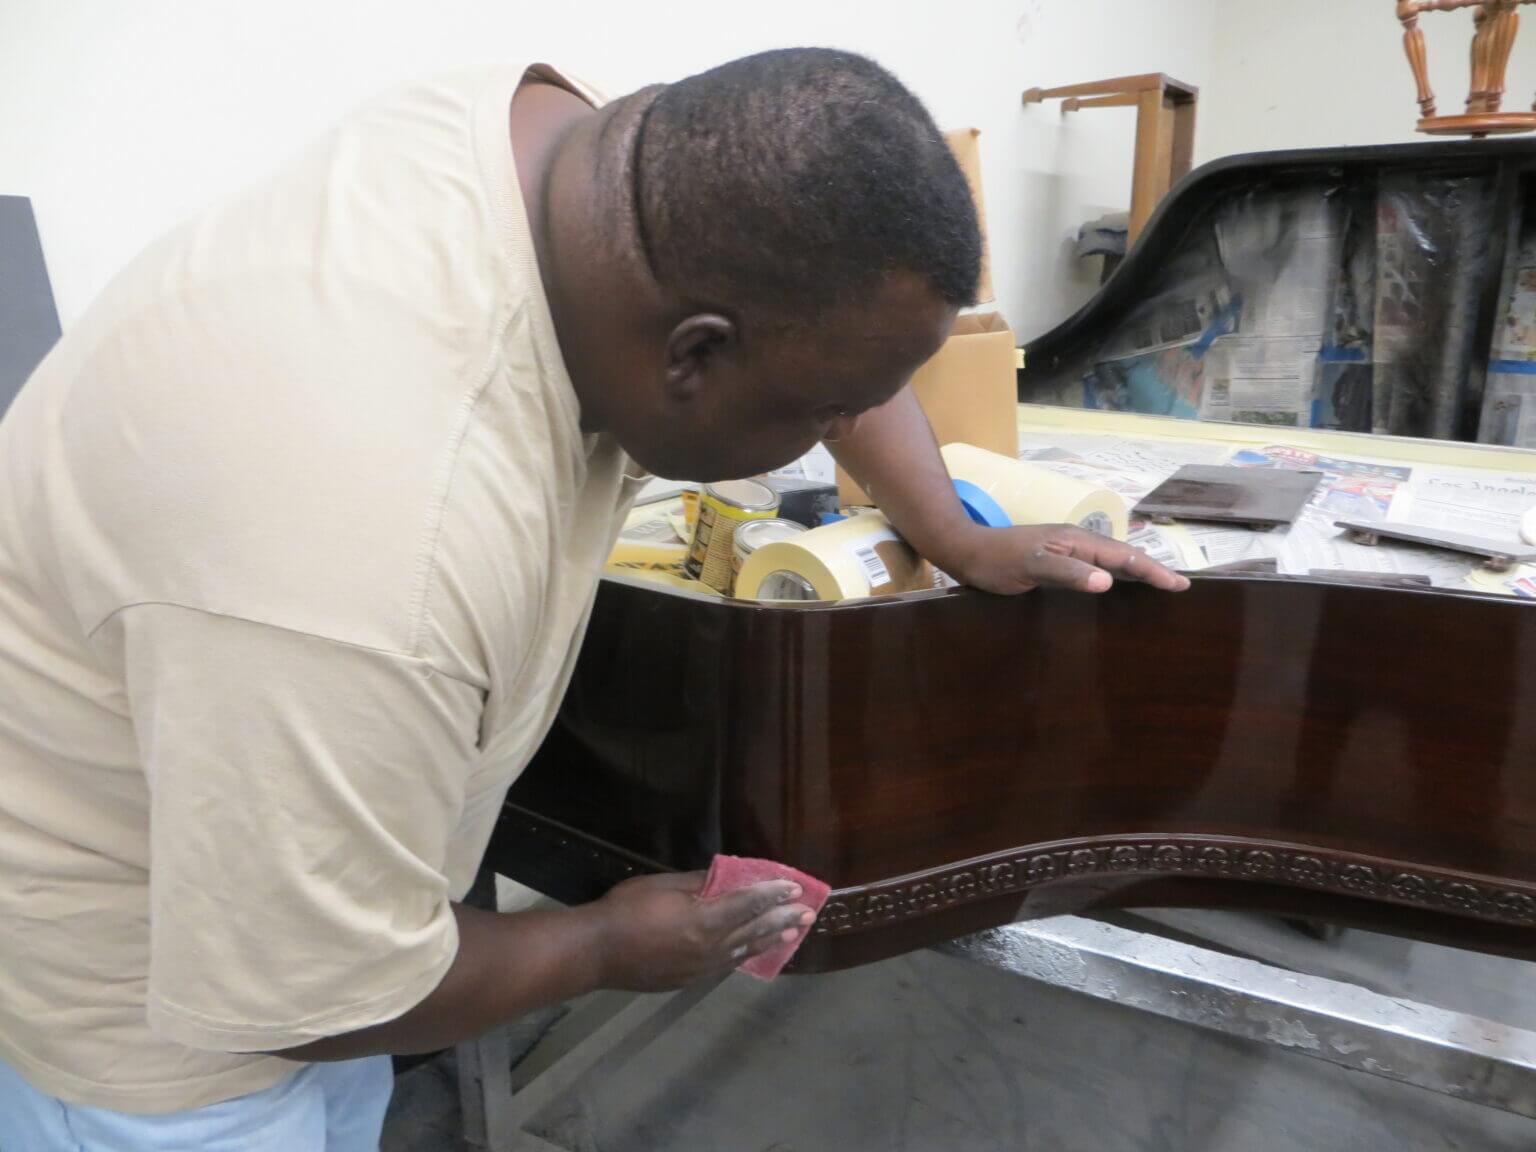 A man is working on a piano